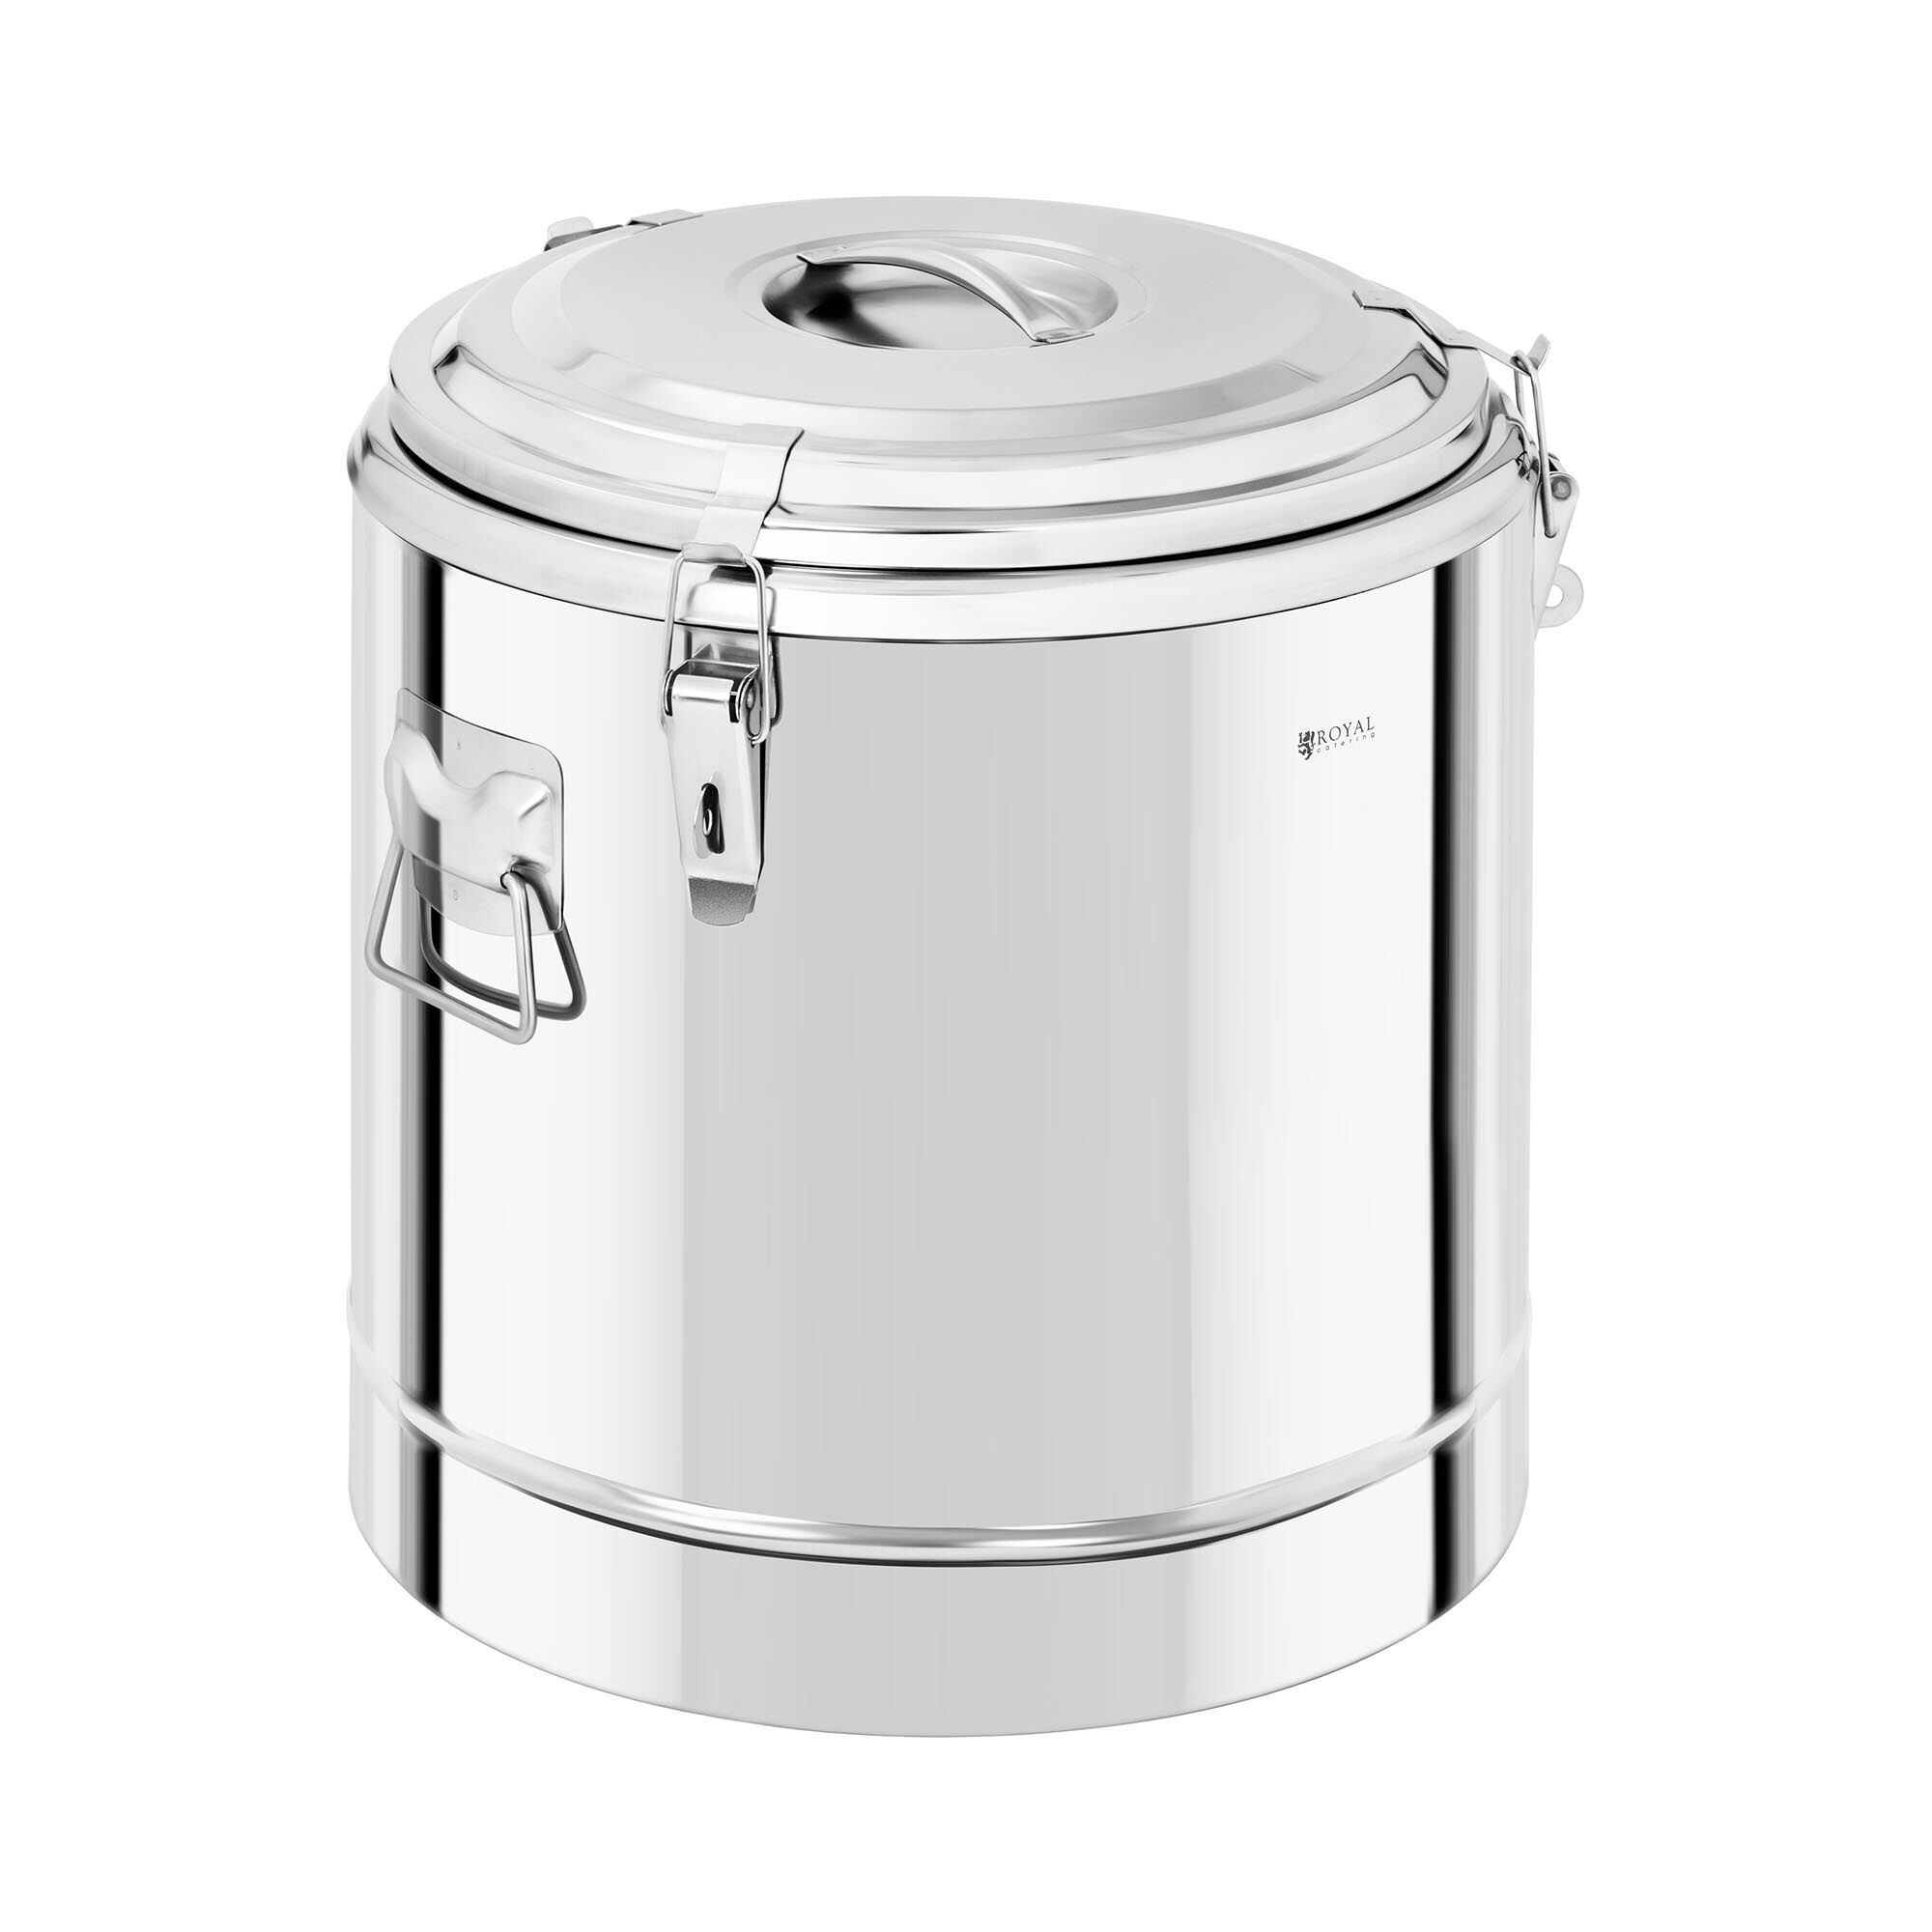 Royal Catering Thermobehälter Edelstahl - 35 L 10011216